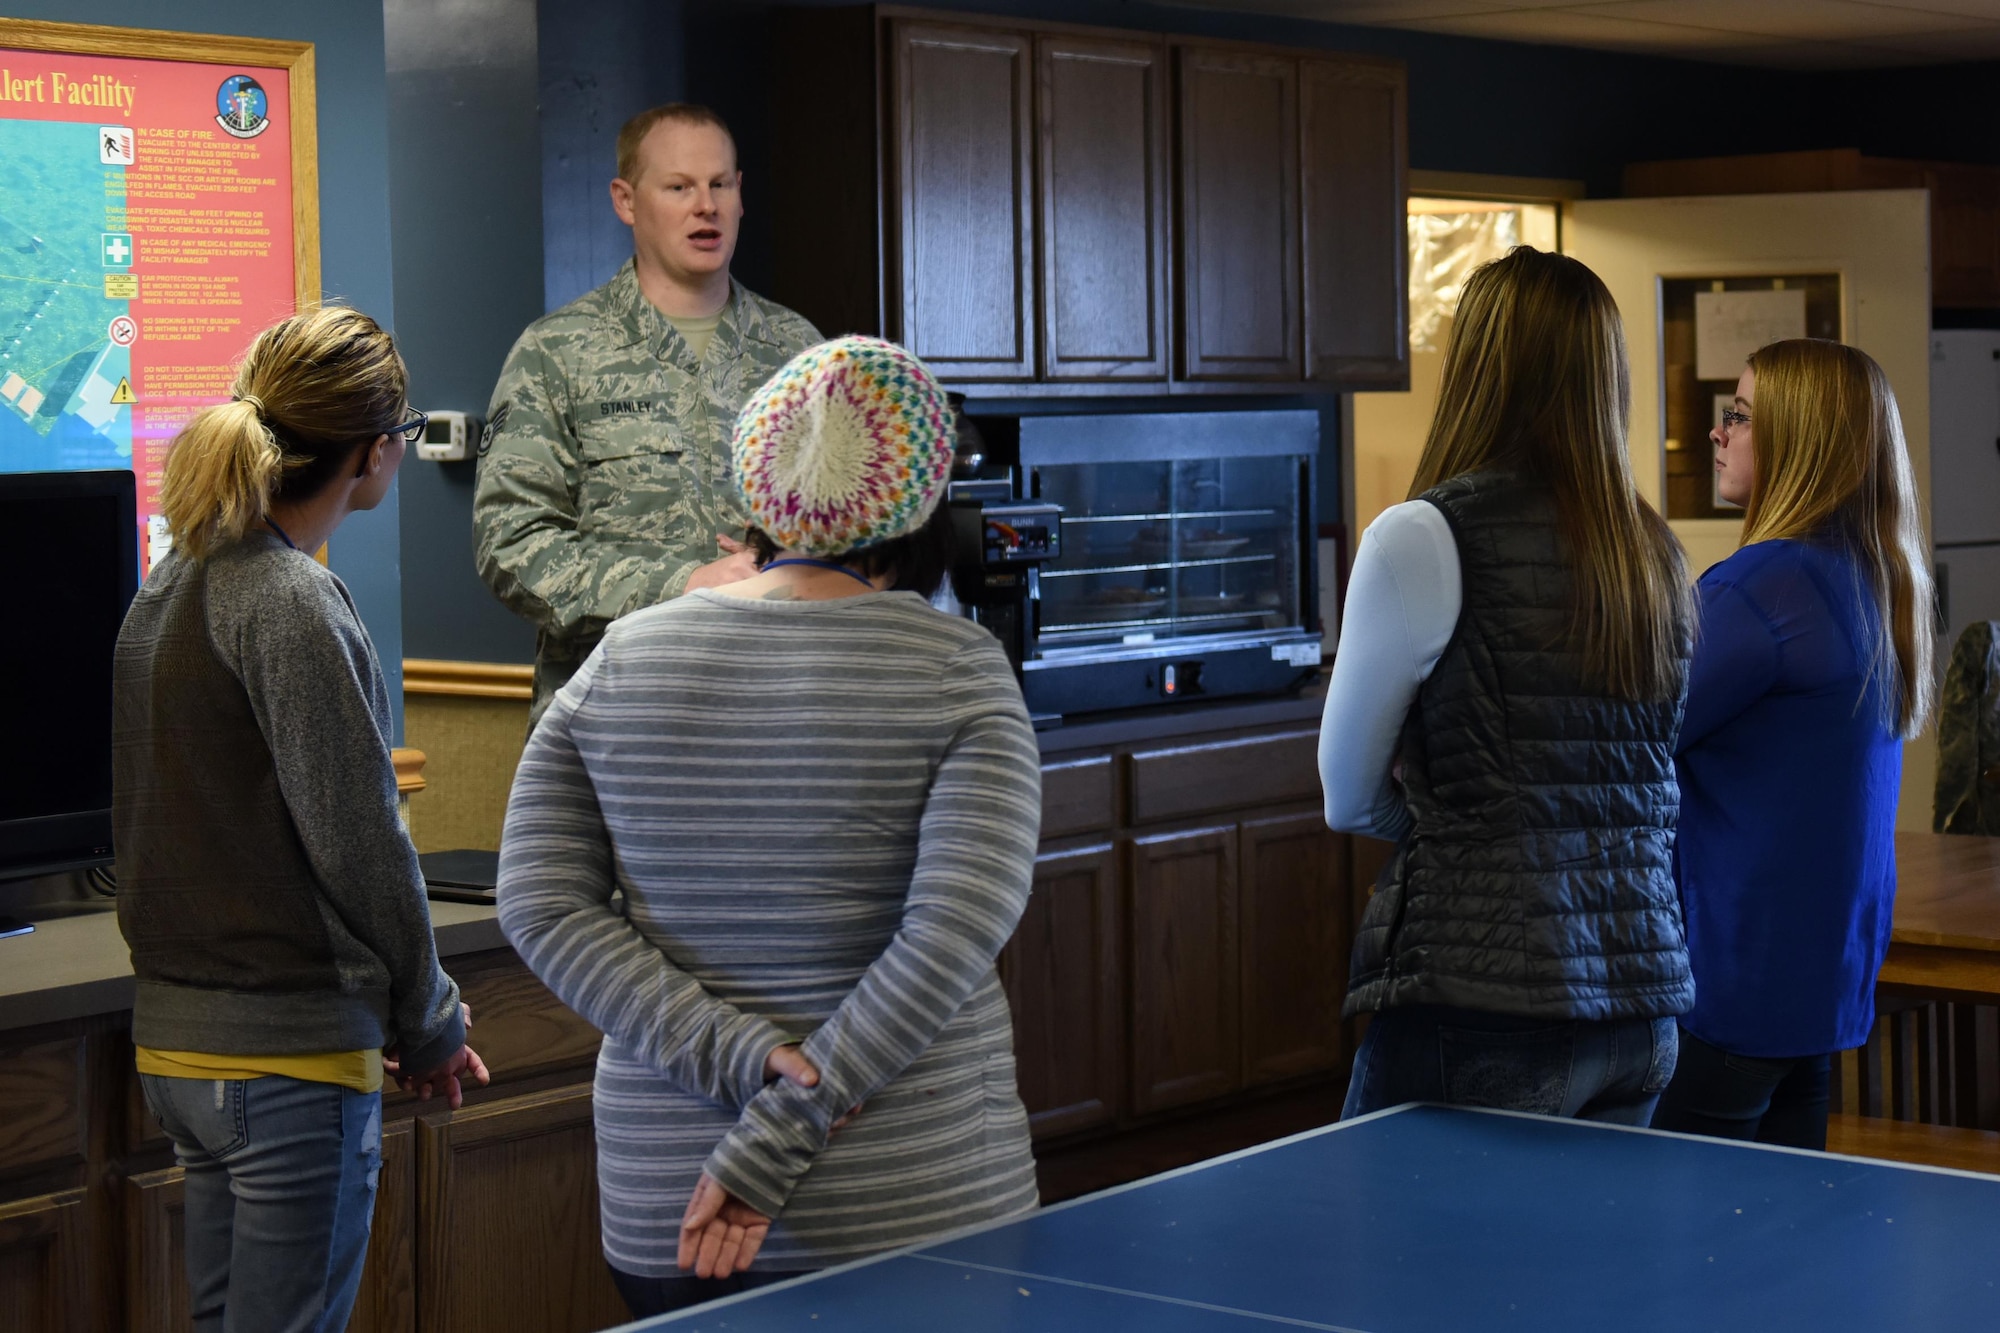 Staff Sgt. Thomas Stanley, 12th Missile Squadron facility manager, speaks with spouses during a tour at a missile alert facility Oct. 14, 2017, at Malmstrom Air Force Base, Mont. Stanley showed the spouses what day-to-day operations are at a MAF. (U.S. Air Force photo/Tech. Sgt. Caleb Pierce)